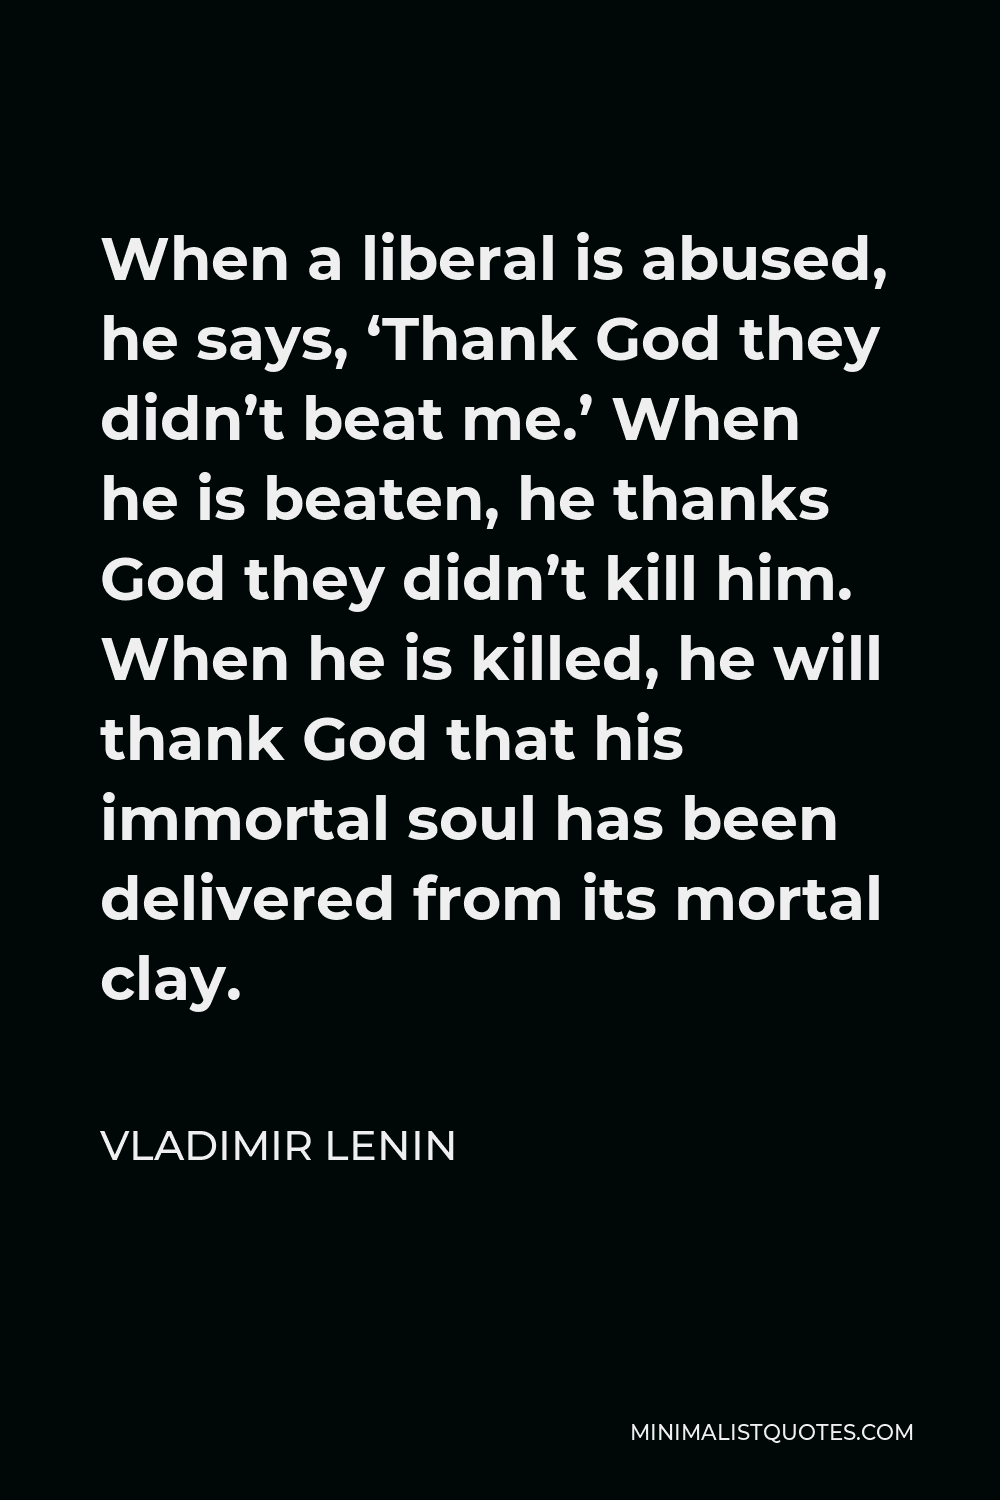 Vladimir Lenin Quote - When a liberal is abused, he says, ‘Thank God they didn’t beat me.’ When he is beaten, he thanks God they didn’t kill him. When he is killed, he will thank God that his immortal soul has been delivered from its mortal clay.